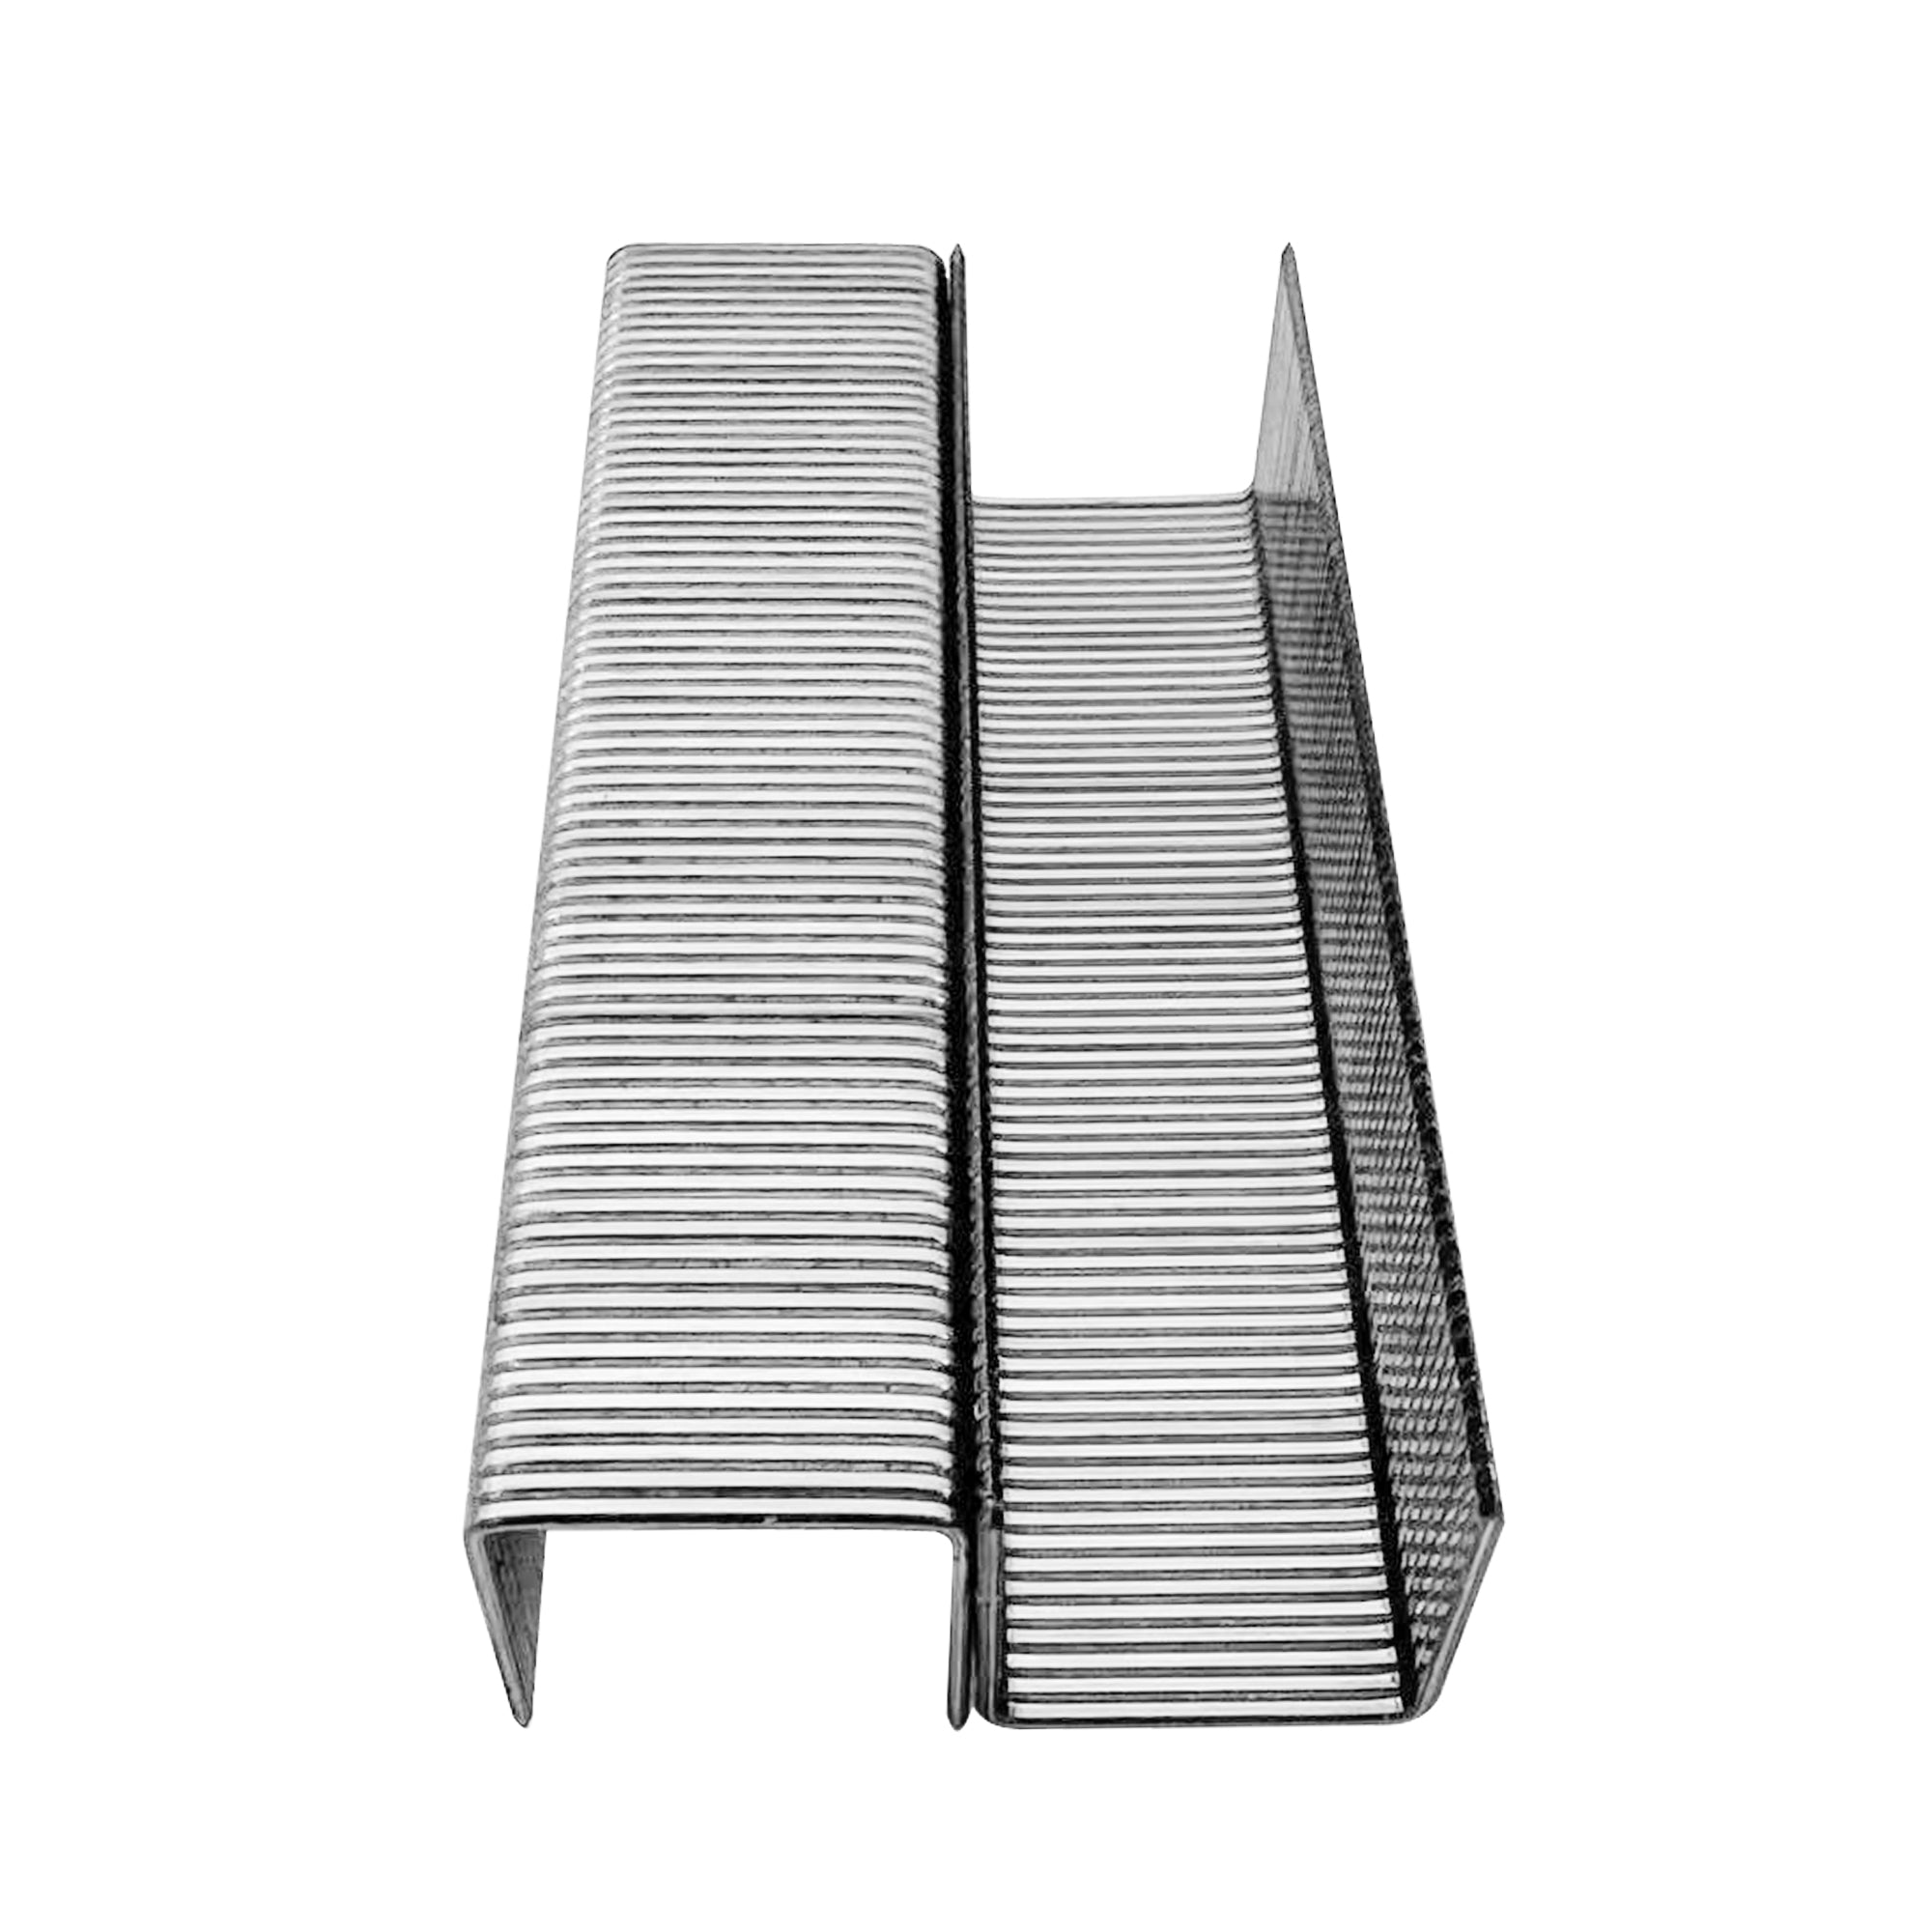 Meite P25 16 Gauge 1-Inch (26.4 mm) Wide Crown by 1-Inch Length Galvanized Construction Staples Heavy Wire Staples (10,000 Pcs)